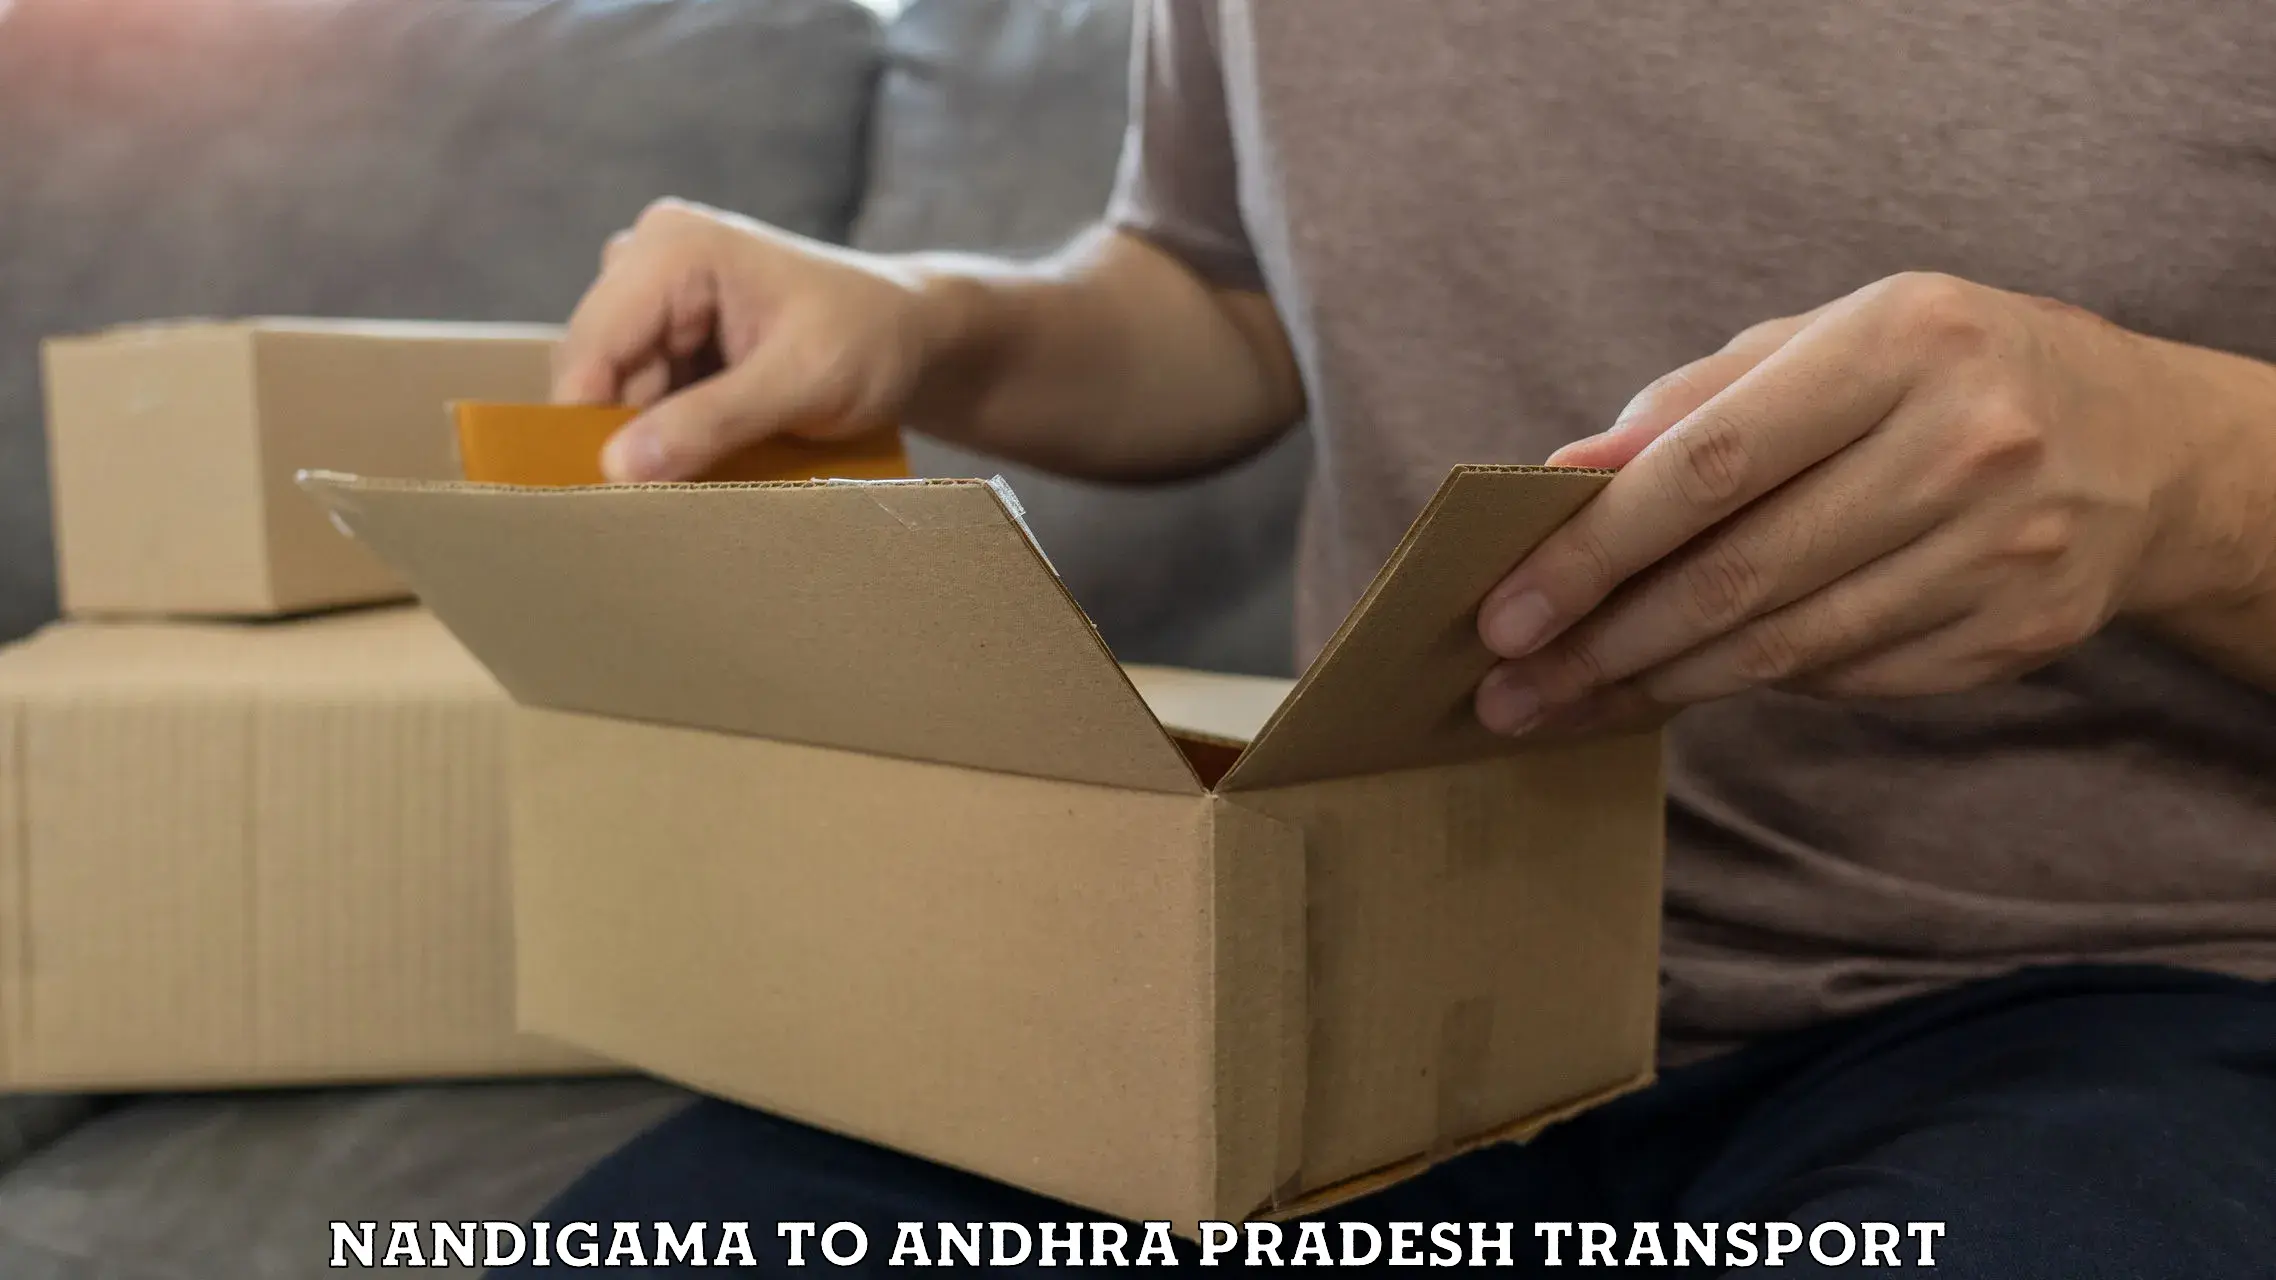 Delivery service Nandigama to Andhra Pradesh